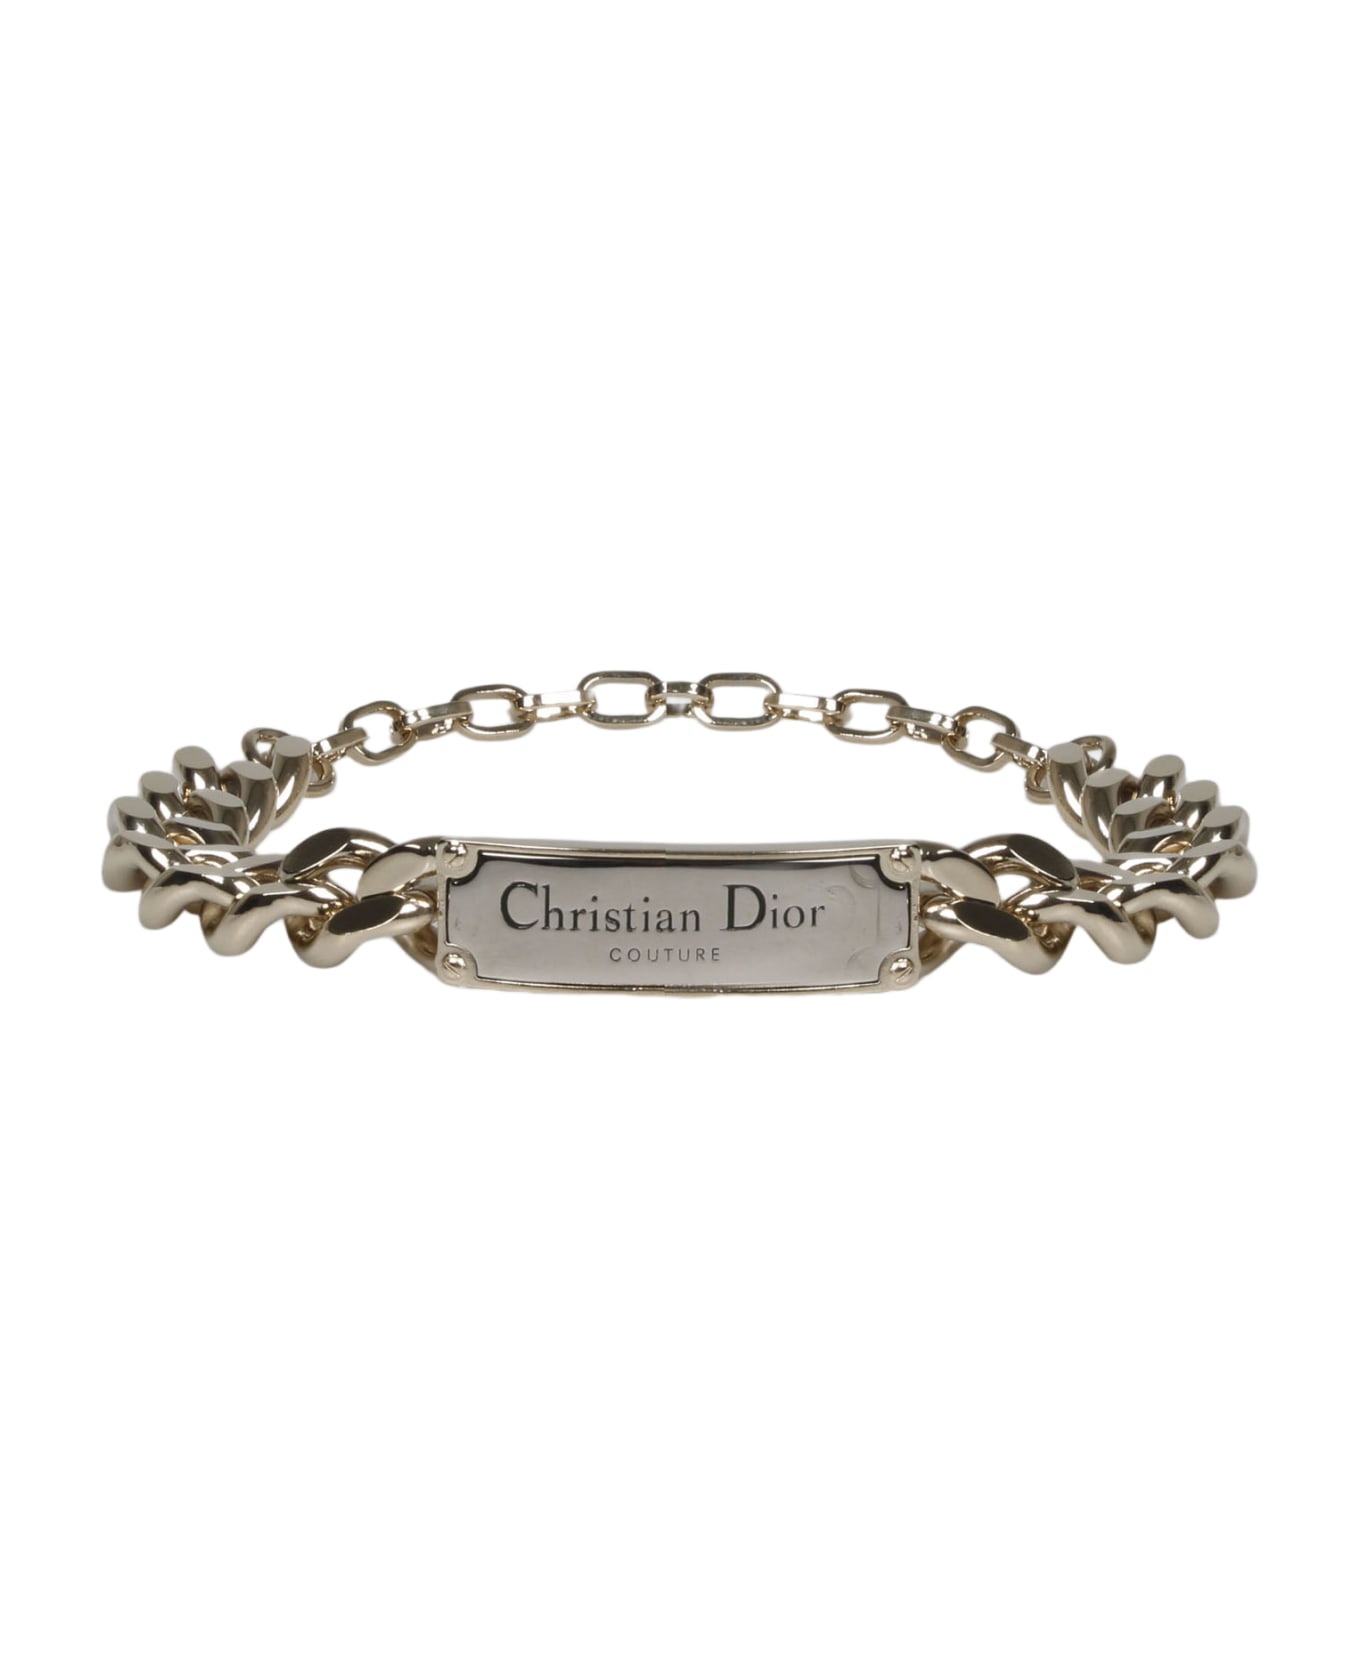 Dior Christian Couture Chain Link Bracelet - Metallic ブレスレット